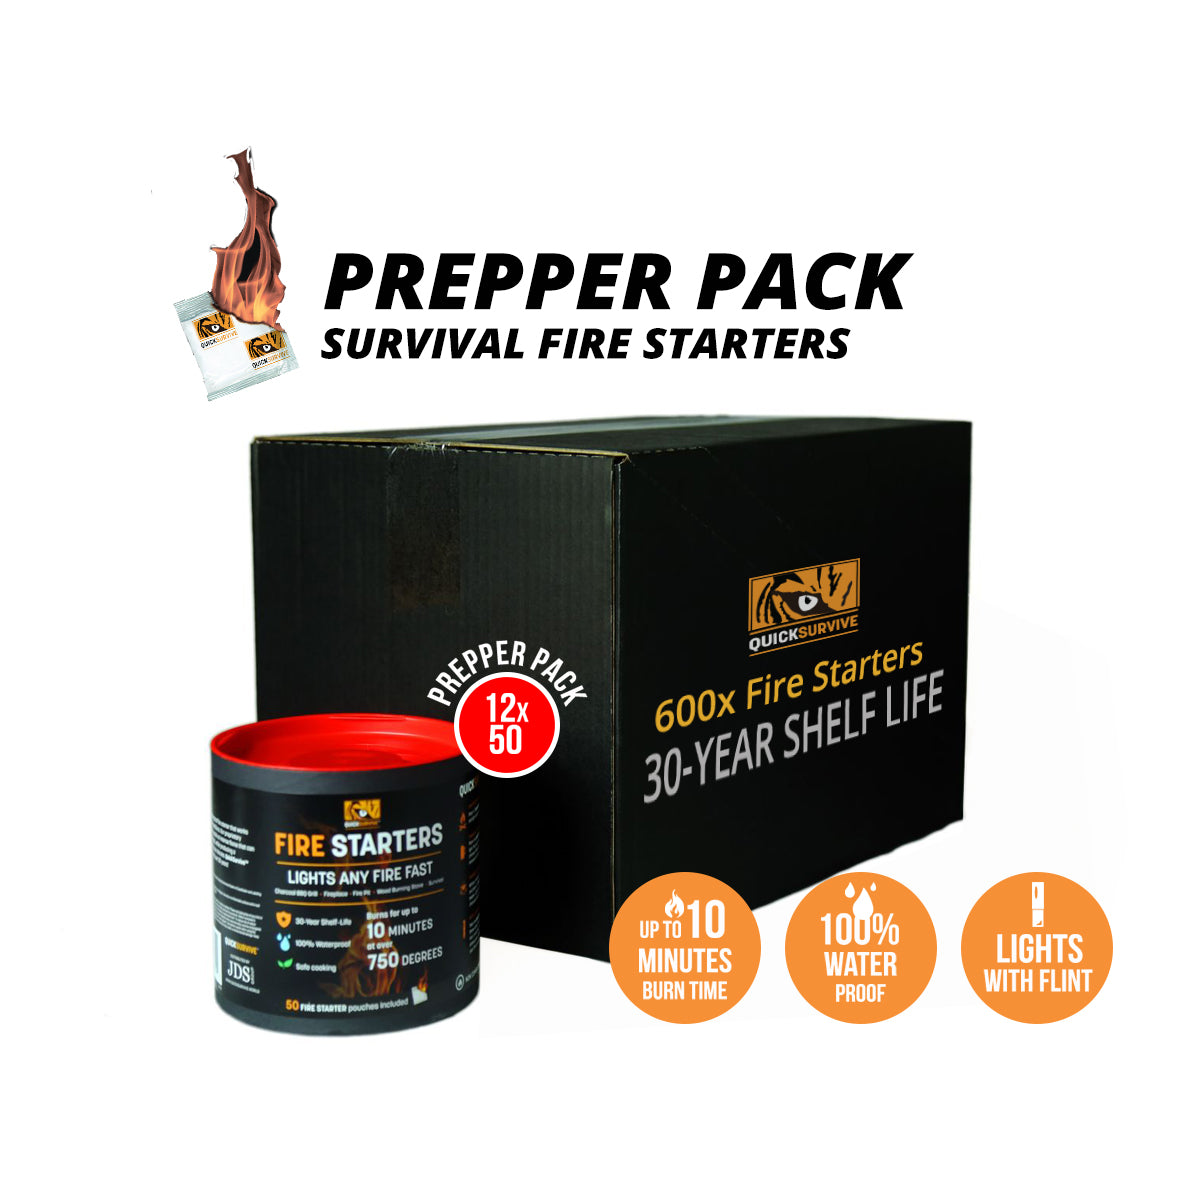 Fire Starter Dooms Day Prepper Pack ( 600 Fire Starters) - QUICKSURVIVE, best survival fire starter cubes and best prepper fire starter tinder for a quick fire, perfect for a safety bunker and bugout bag.